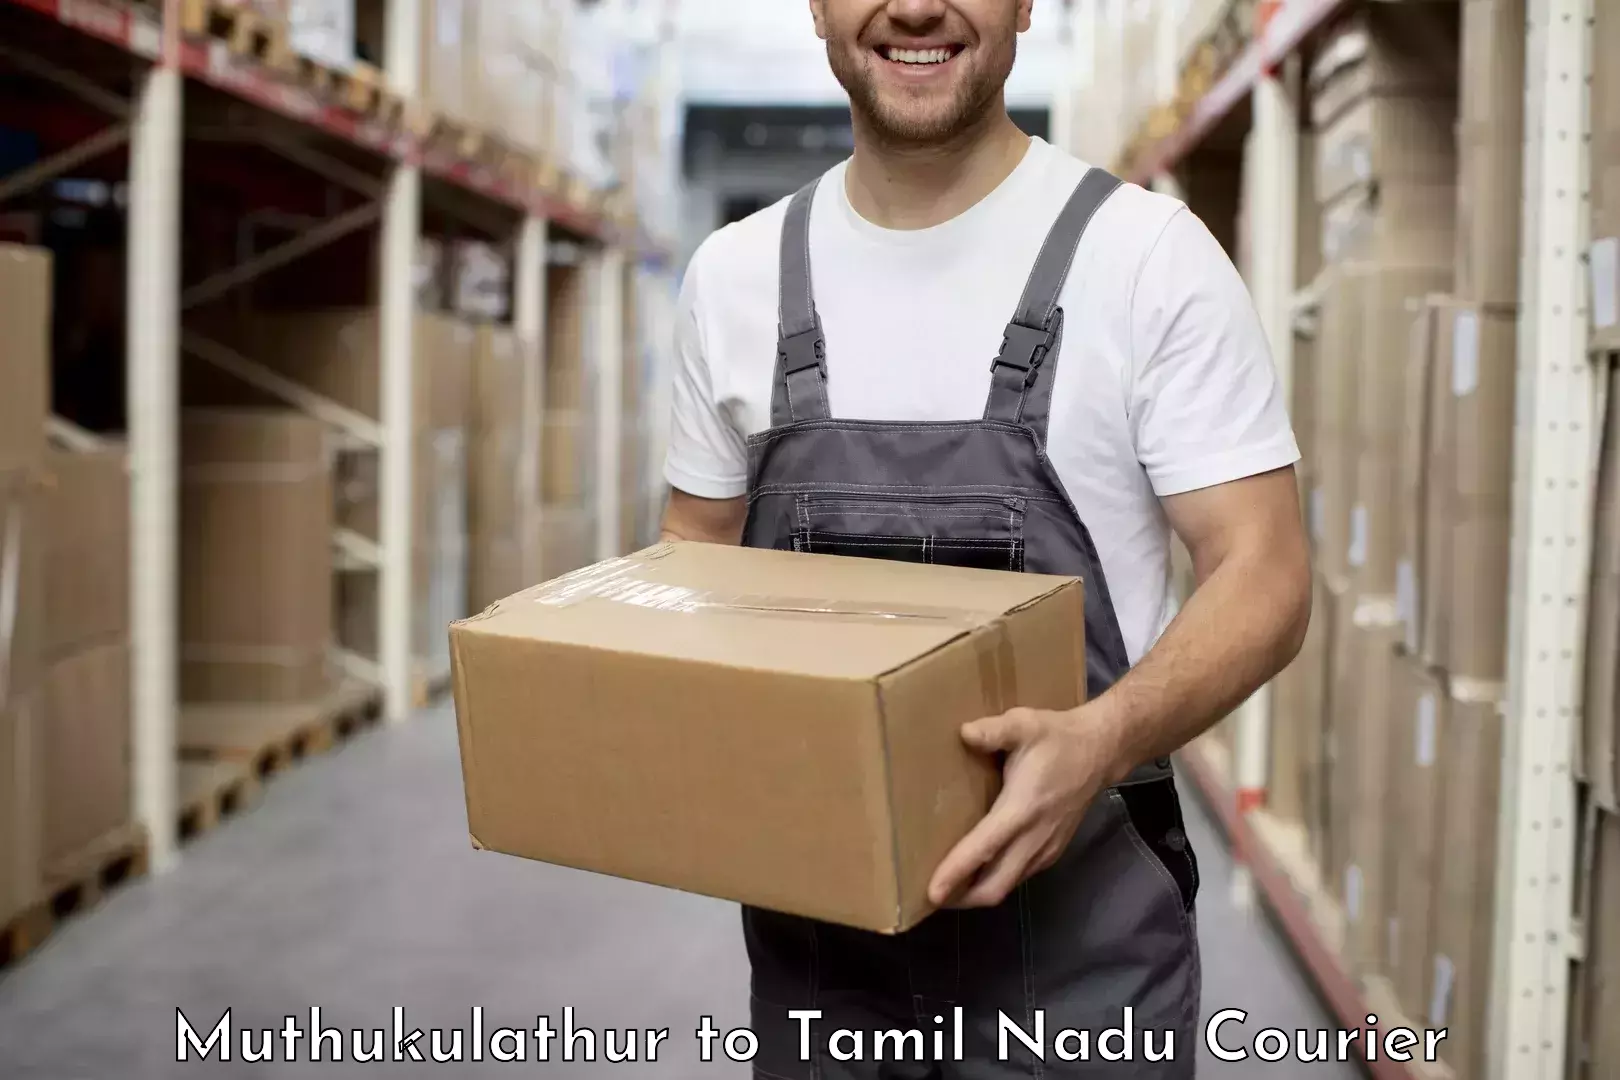 Individual parcel service Muthukulathur to Thanjavur